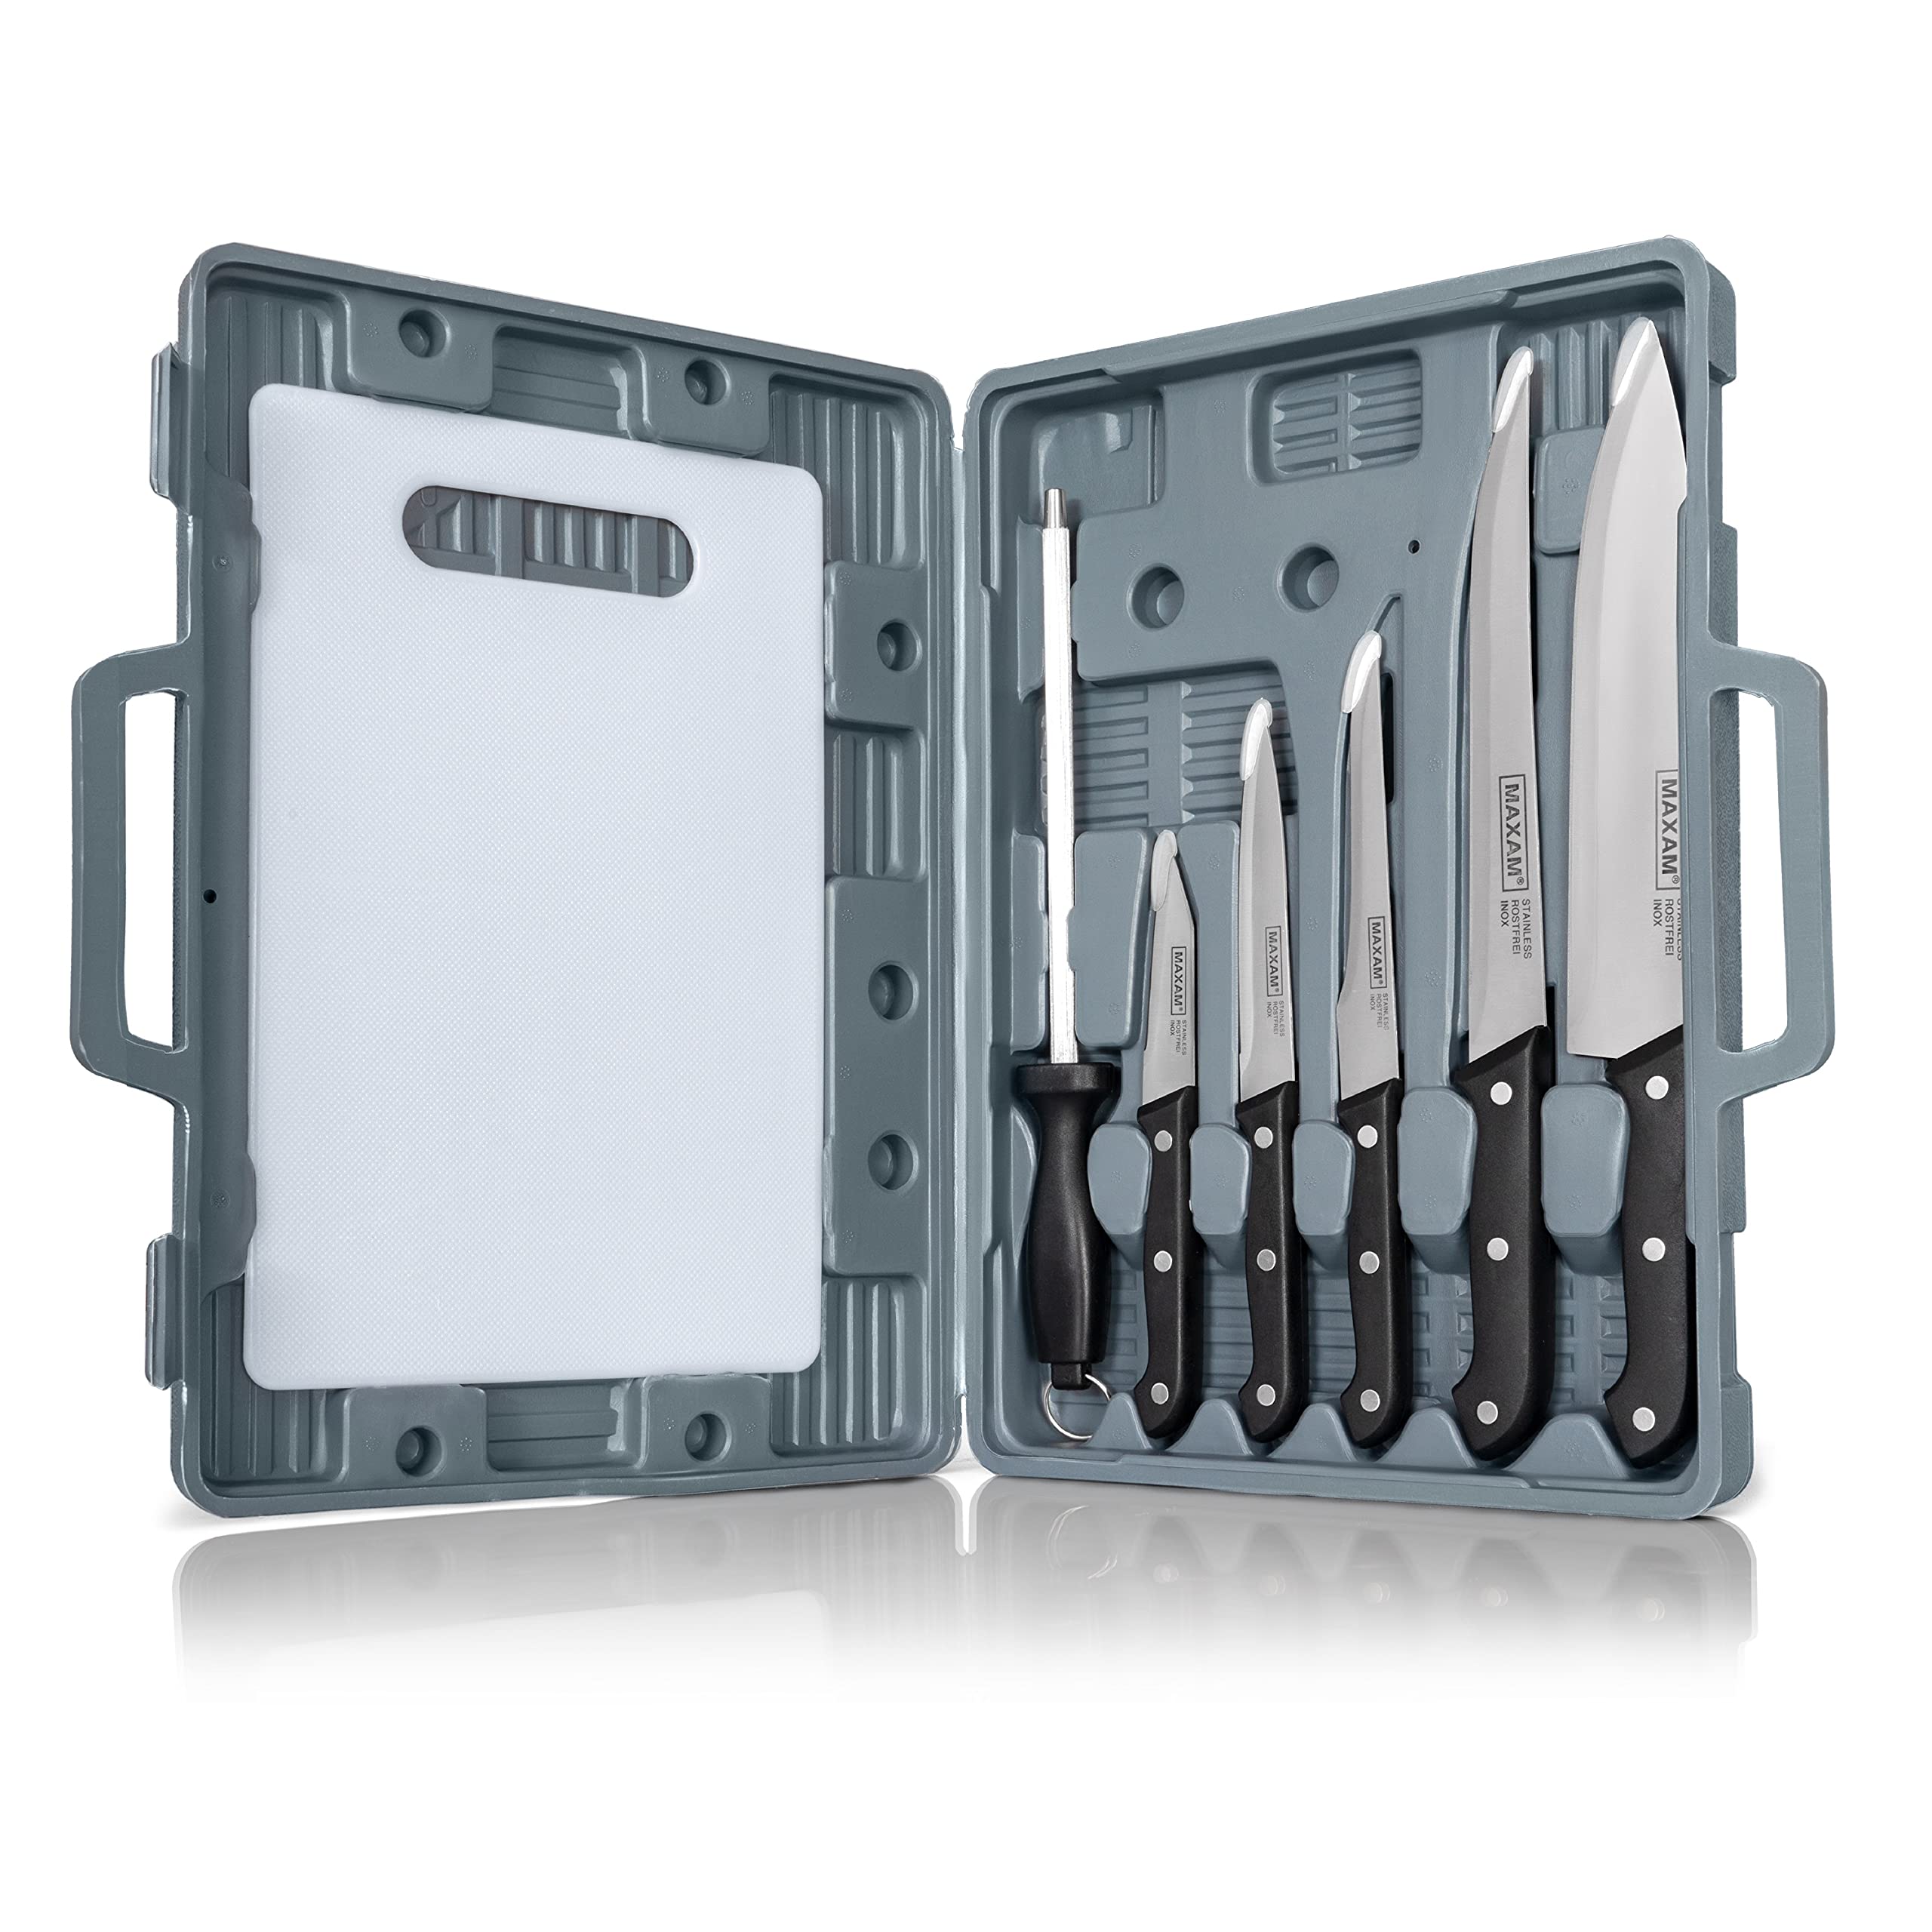 Maxam 8-piece Chef-On-The-Go Cutlery Set, Set Ideal for Many Kitchen Tasks, Includes Cutting Board